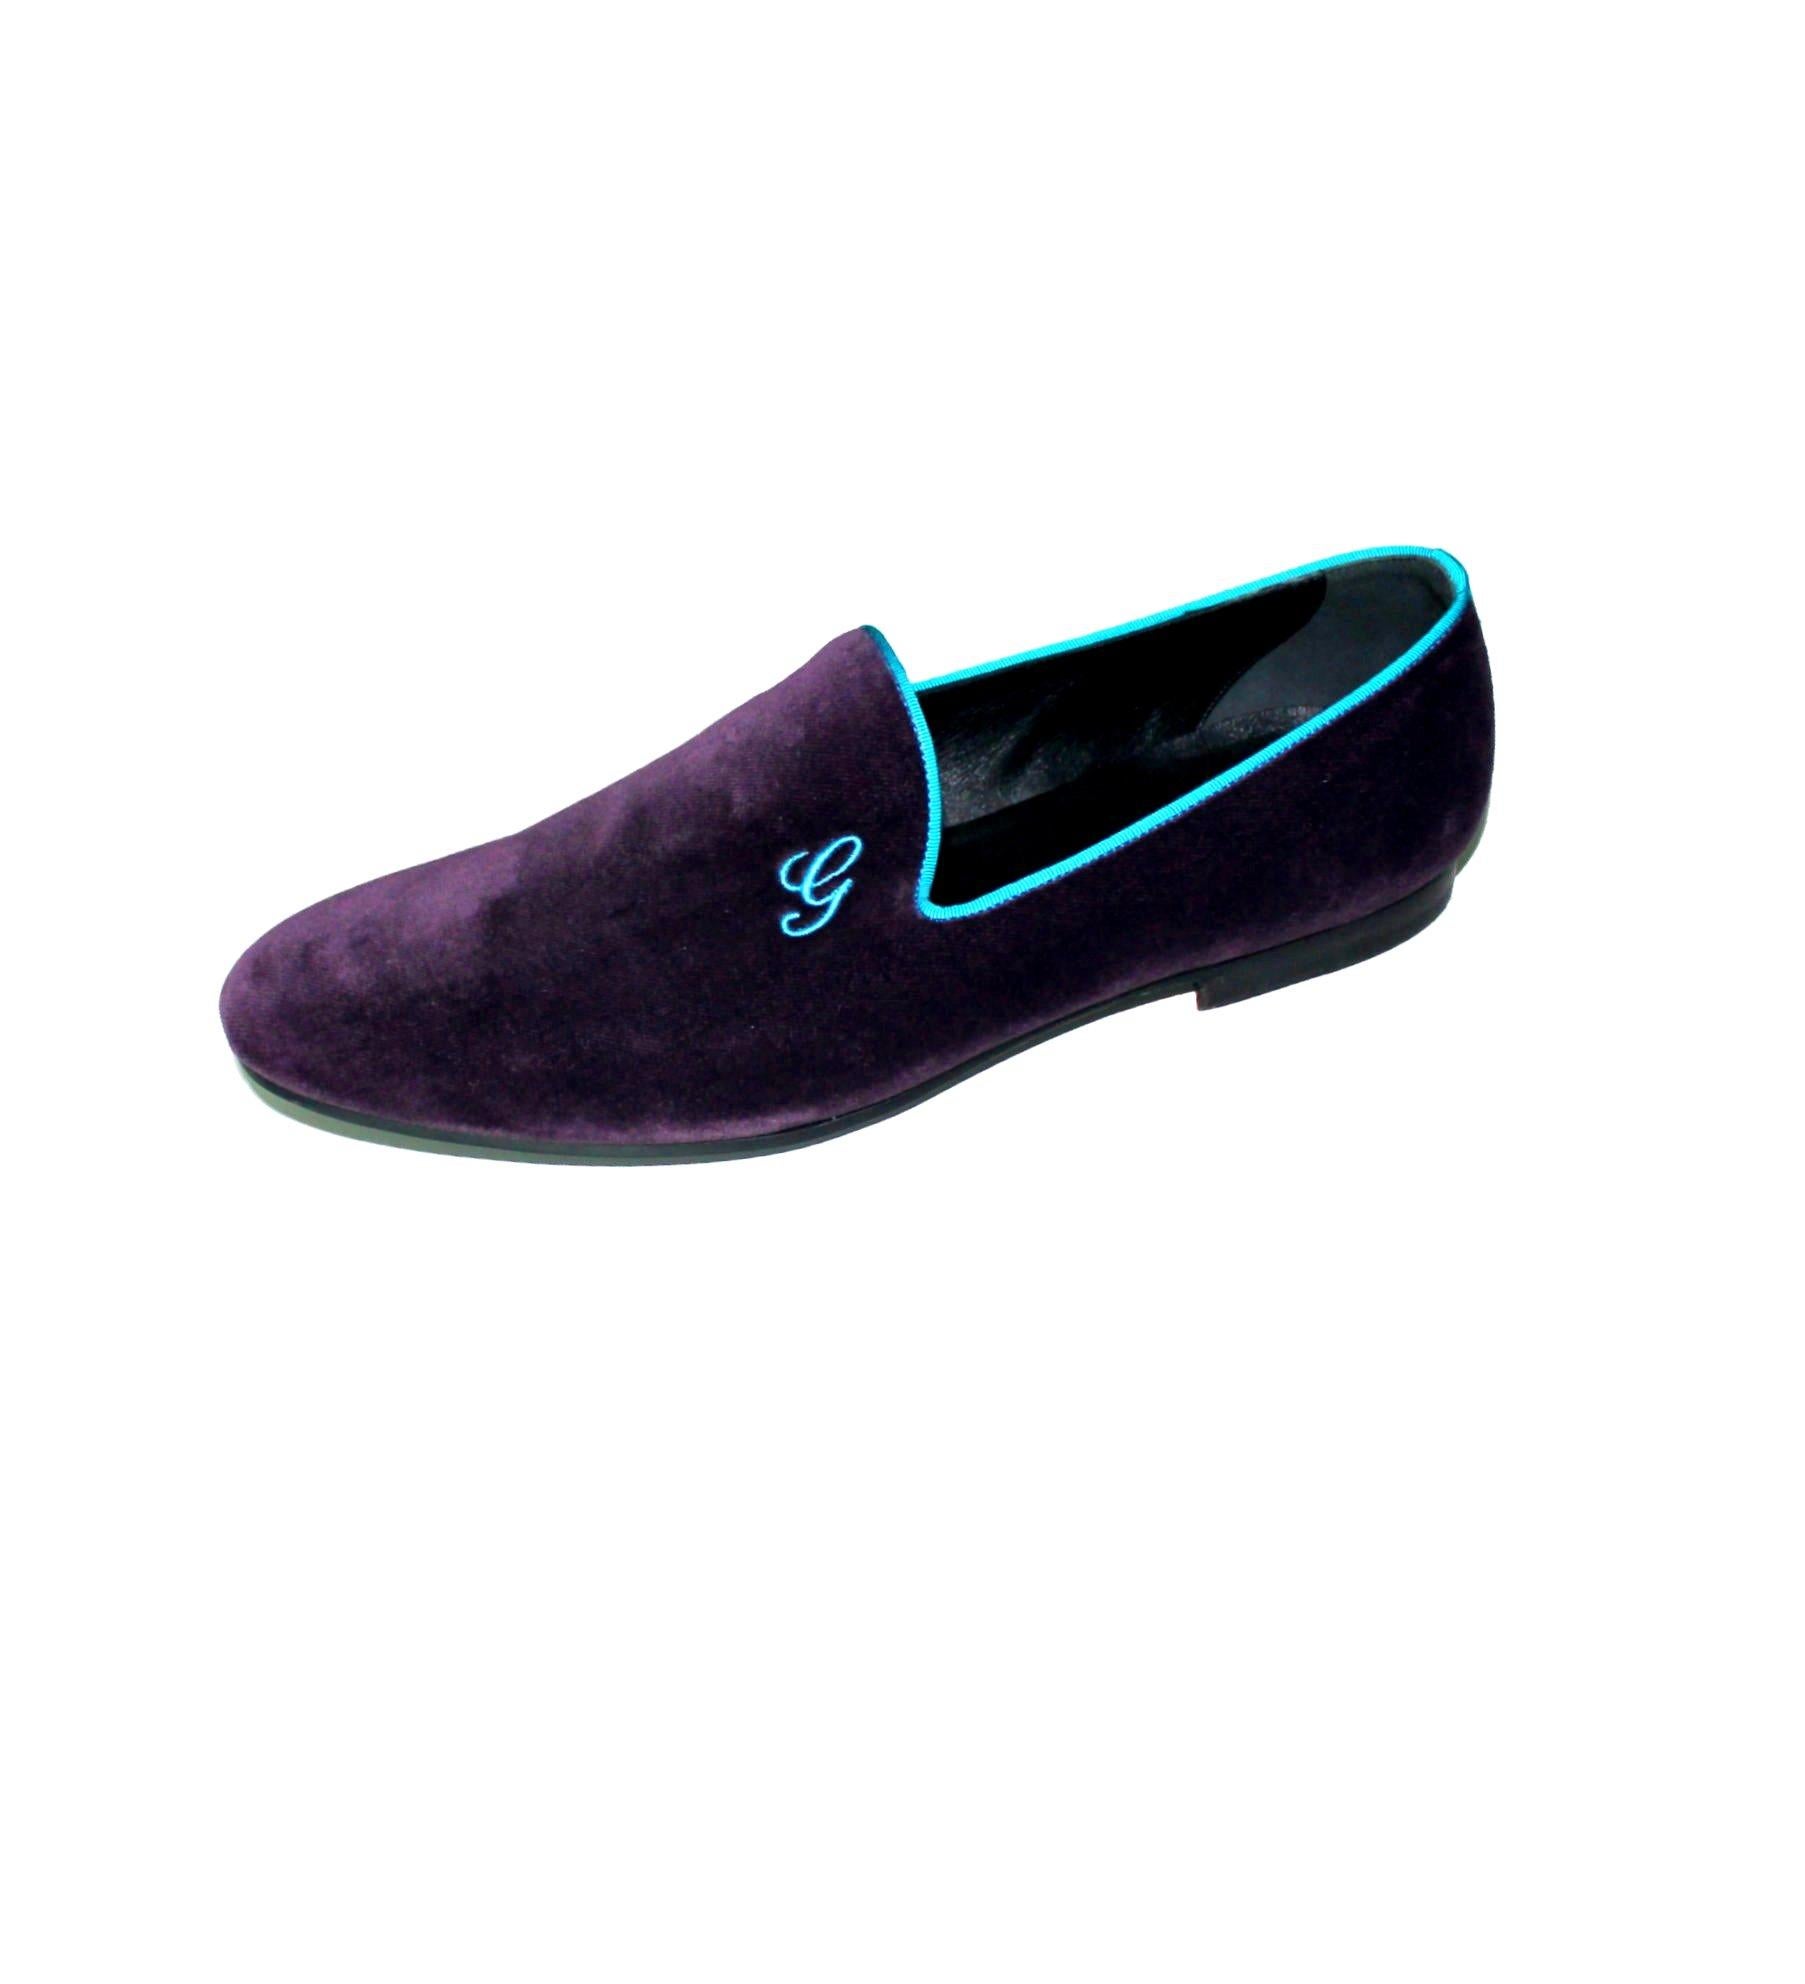 GUCCI BY TOM FORD VELVET LOAFERS

RARE FIND - COLLECTOR'S ITEM

SO VERSATILE - WEAR IT CASUAL WITH JEANS OR WITH YOUR TUXEDO


    A GUCCI signature piece that will last you for years
    Beautiful purple velvet with turquoise trimming
